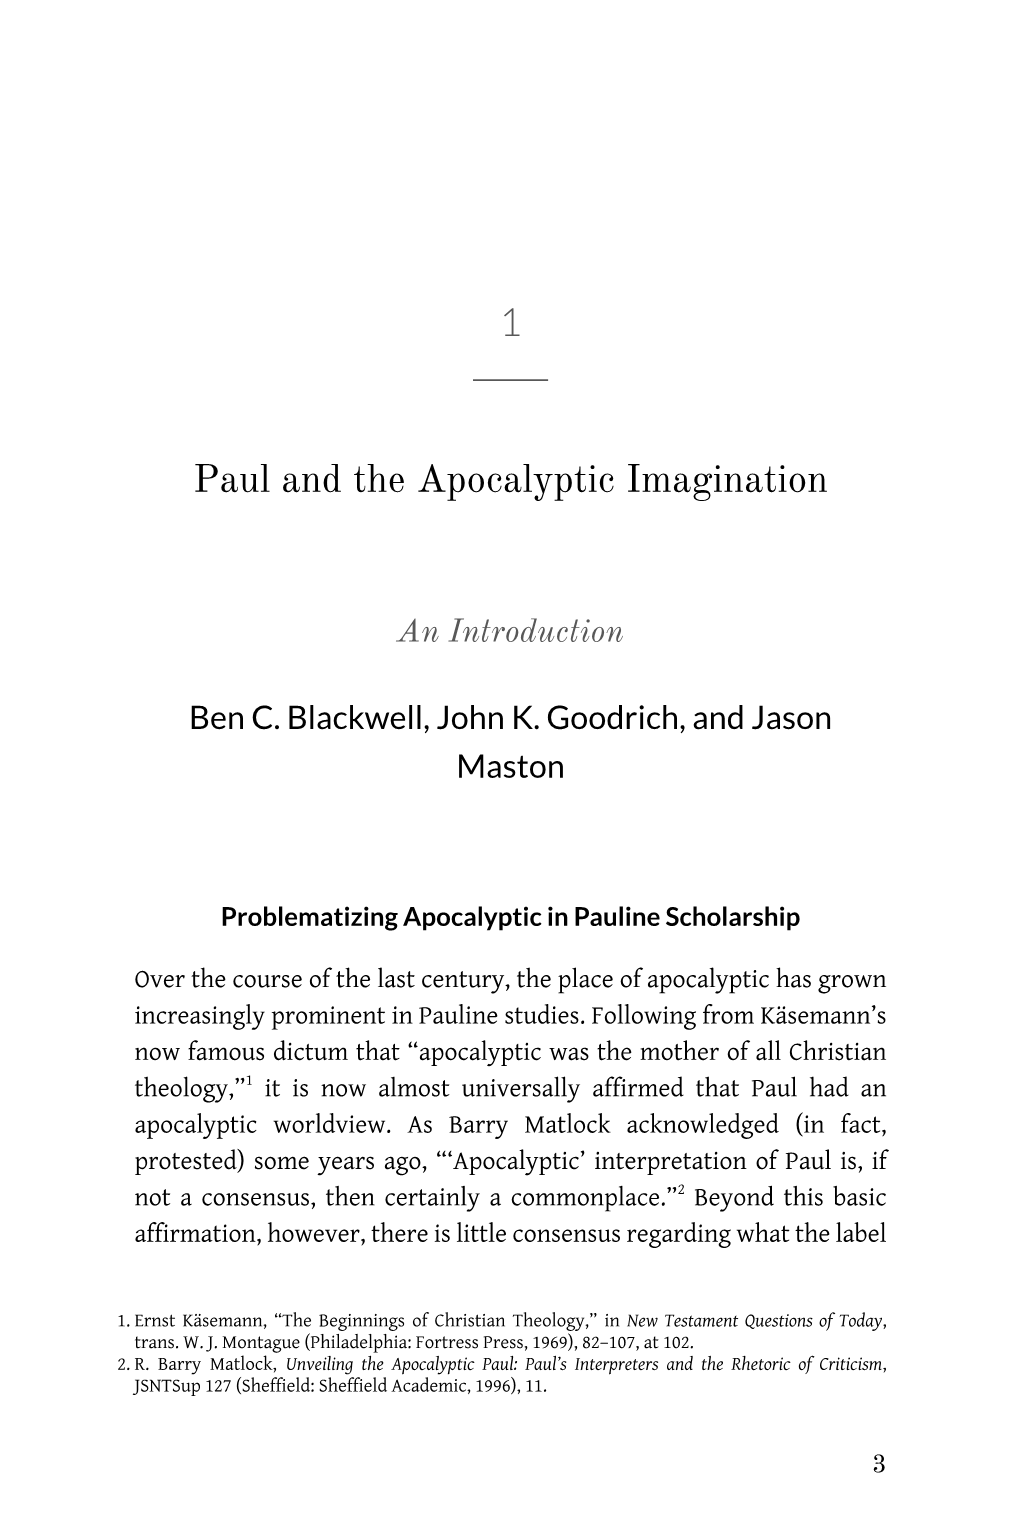 Paul and the Apocalyptic Imagination